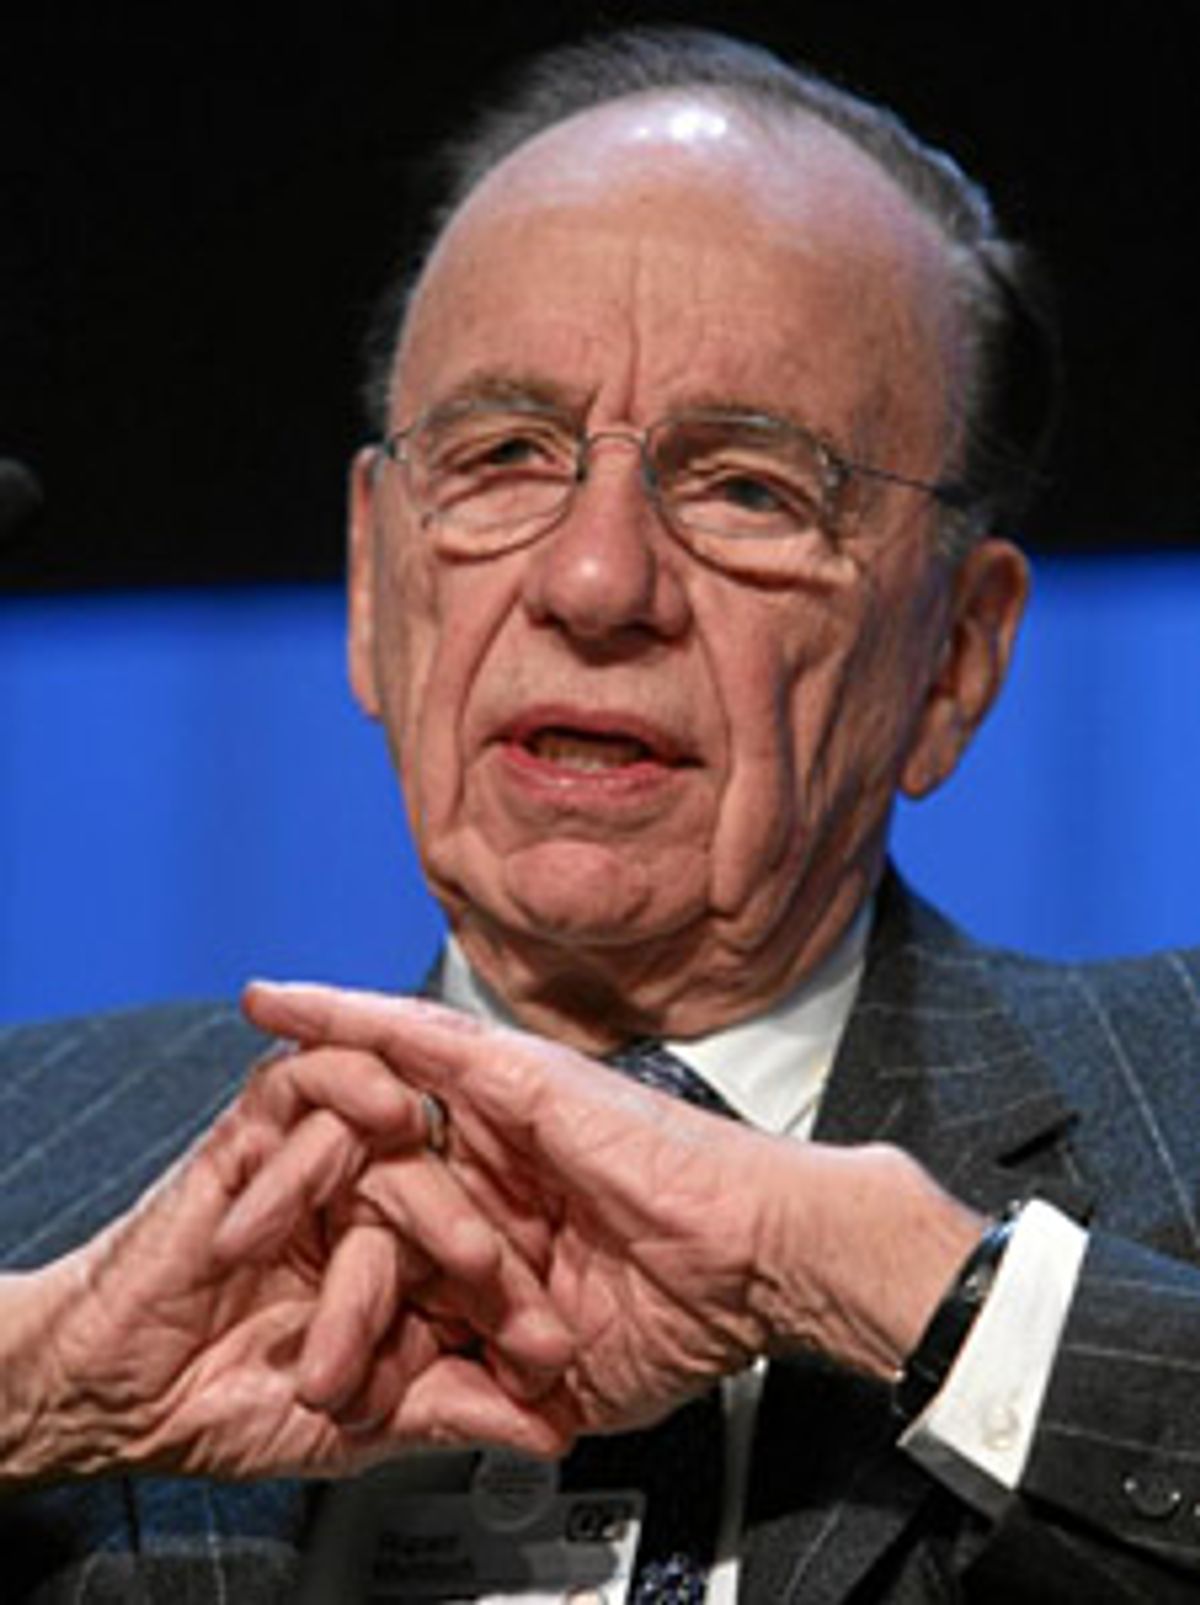 Session 107 Rupert Murdoch

Copyright by World Economic Forum    swiss-image.ch/Photo by 



+++No resale, no archive+++    